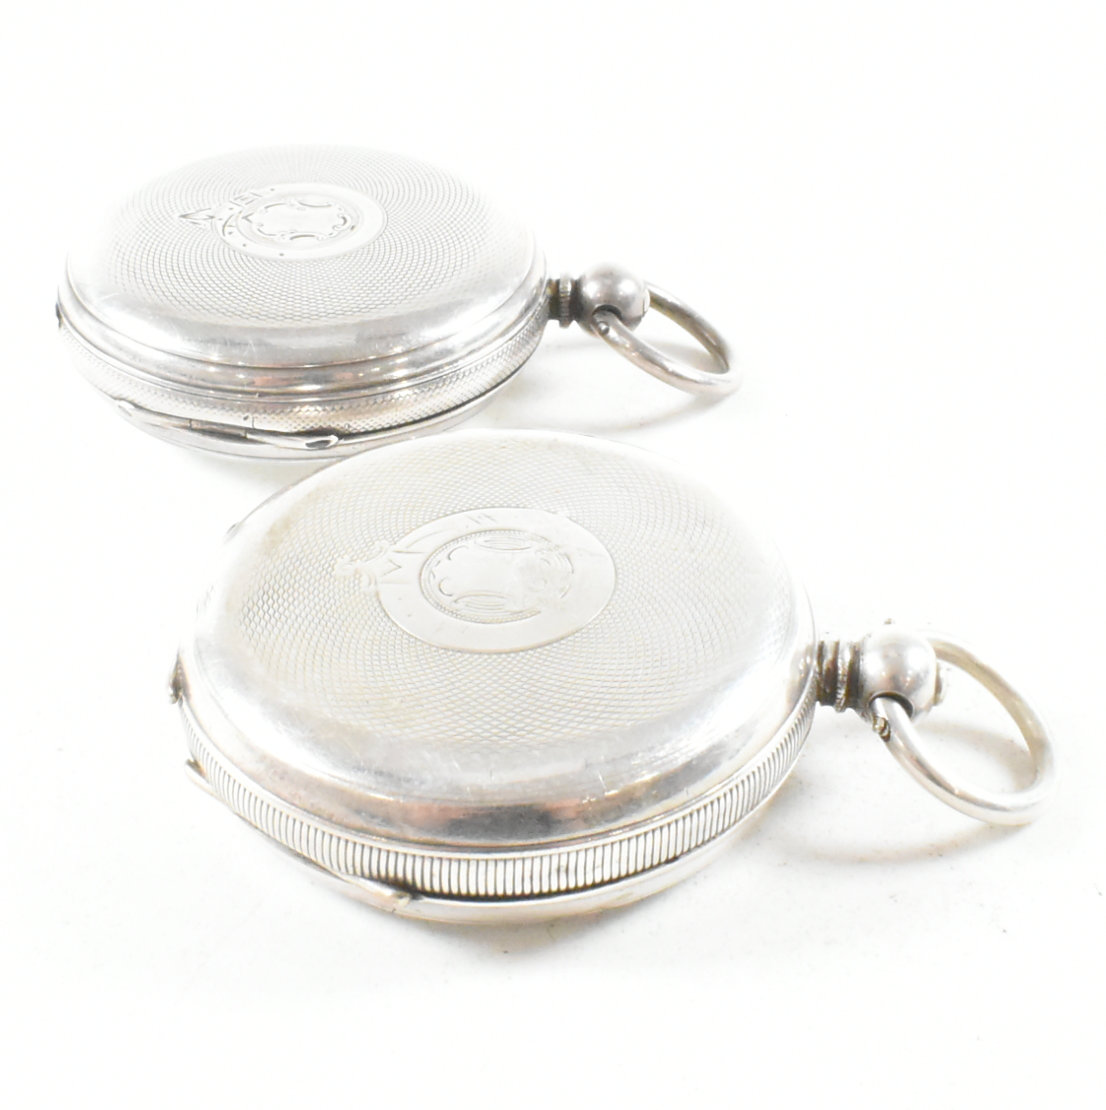 TWO ANTIQUE SILVER CASED POCKET WATCHES - Image 9 of 9